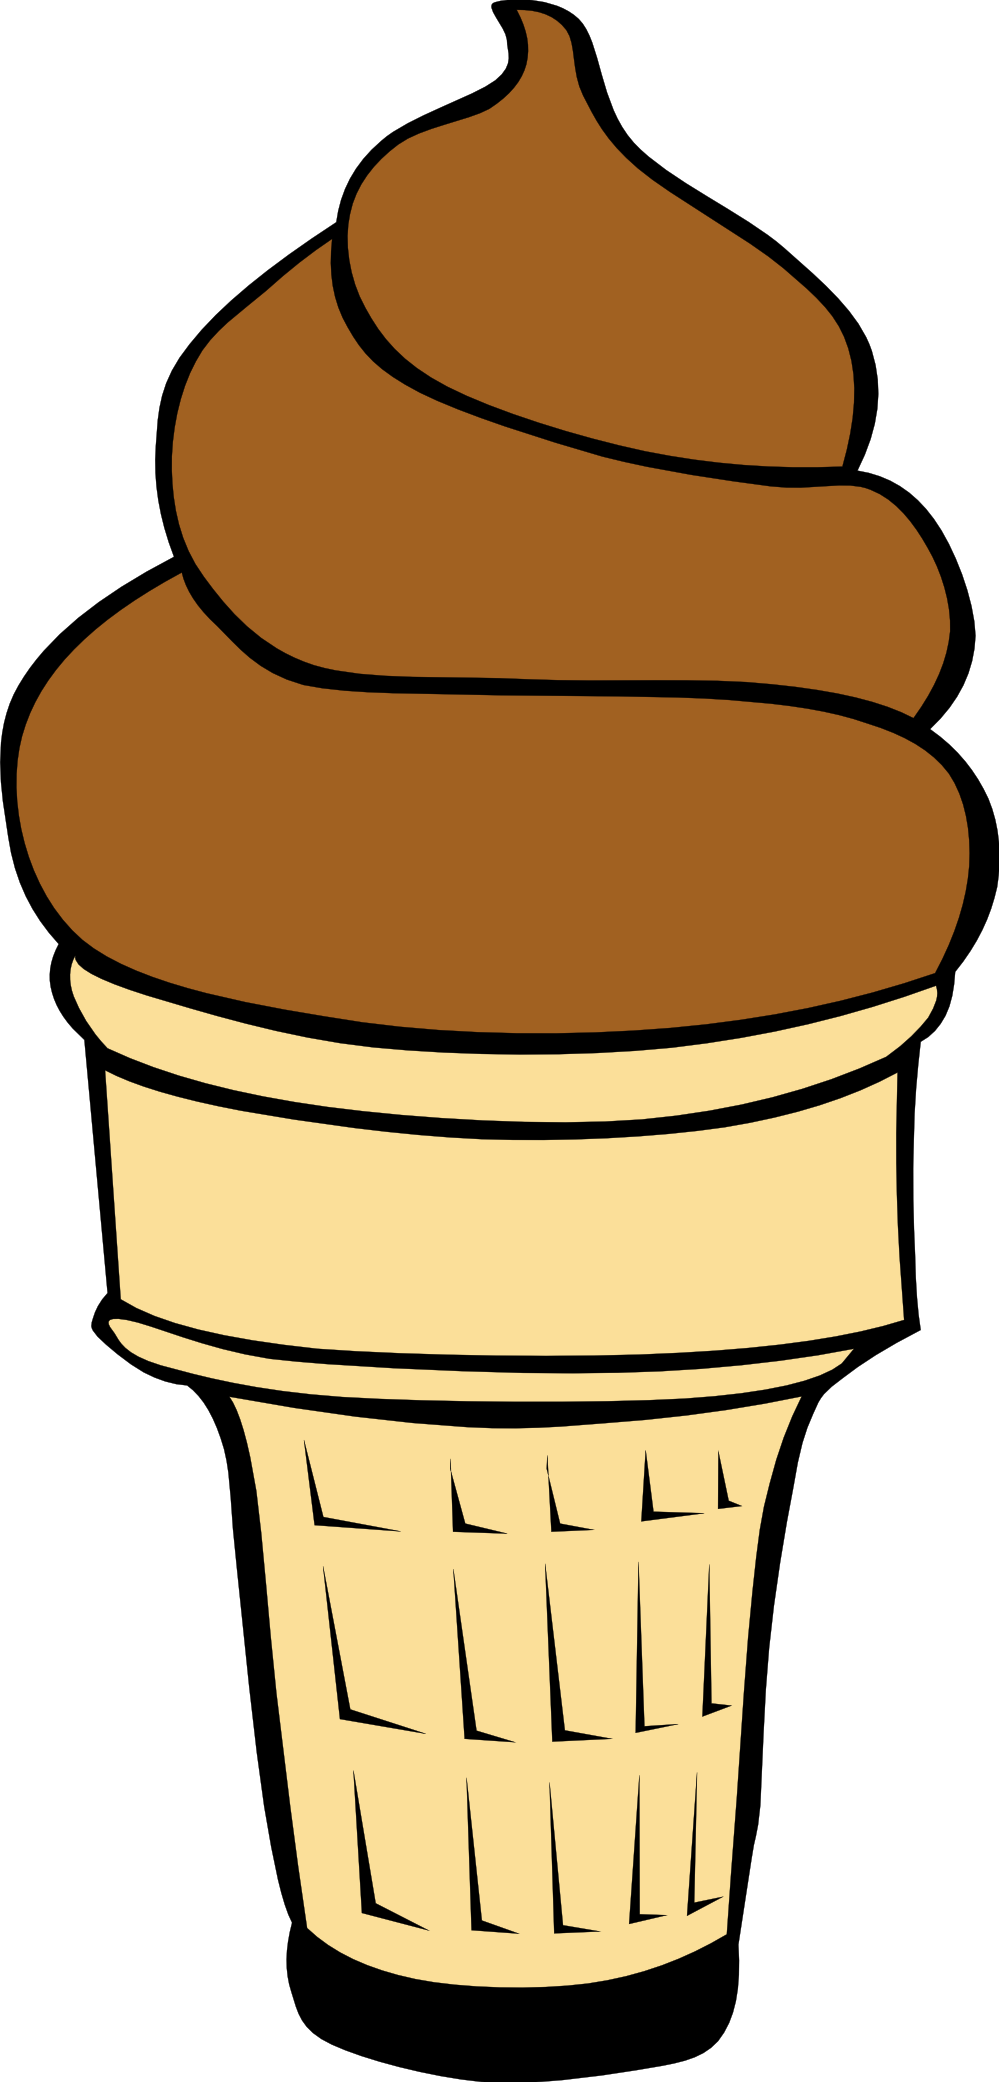 Empty Ice Cream Cone Clipart | Clipart library - Free Clipart Images